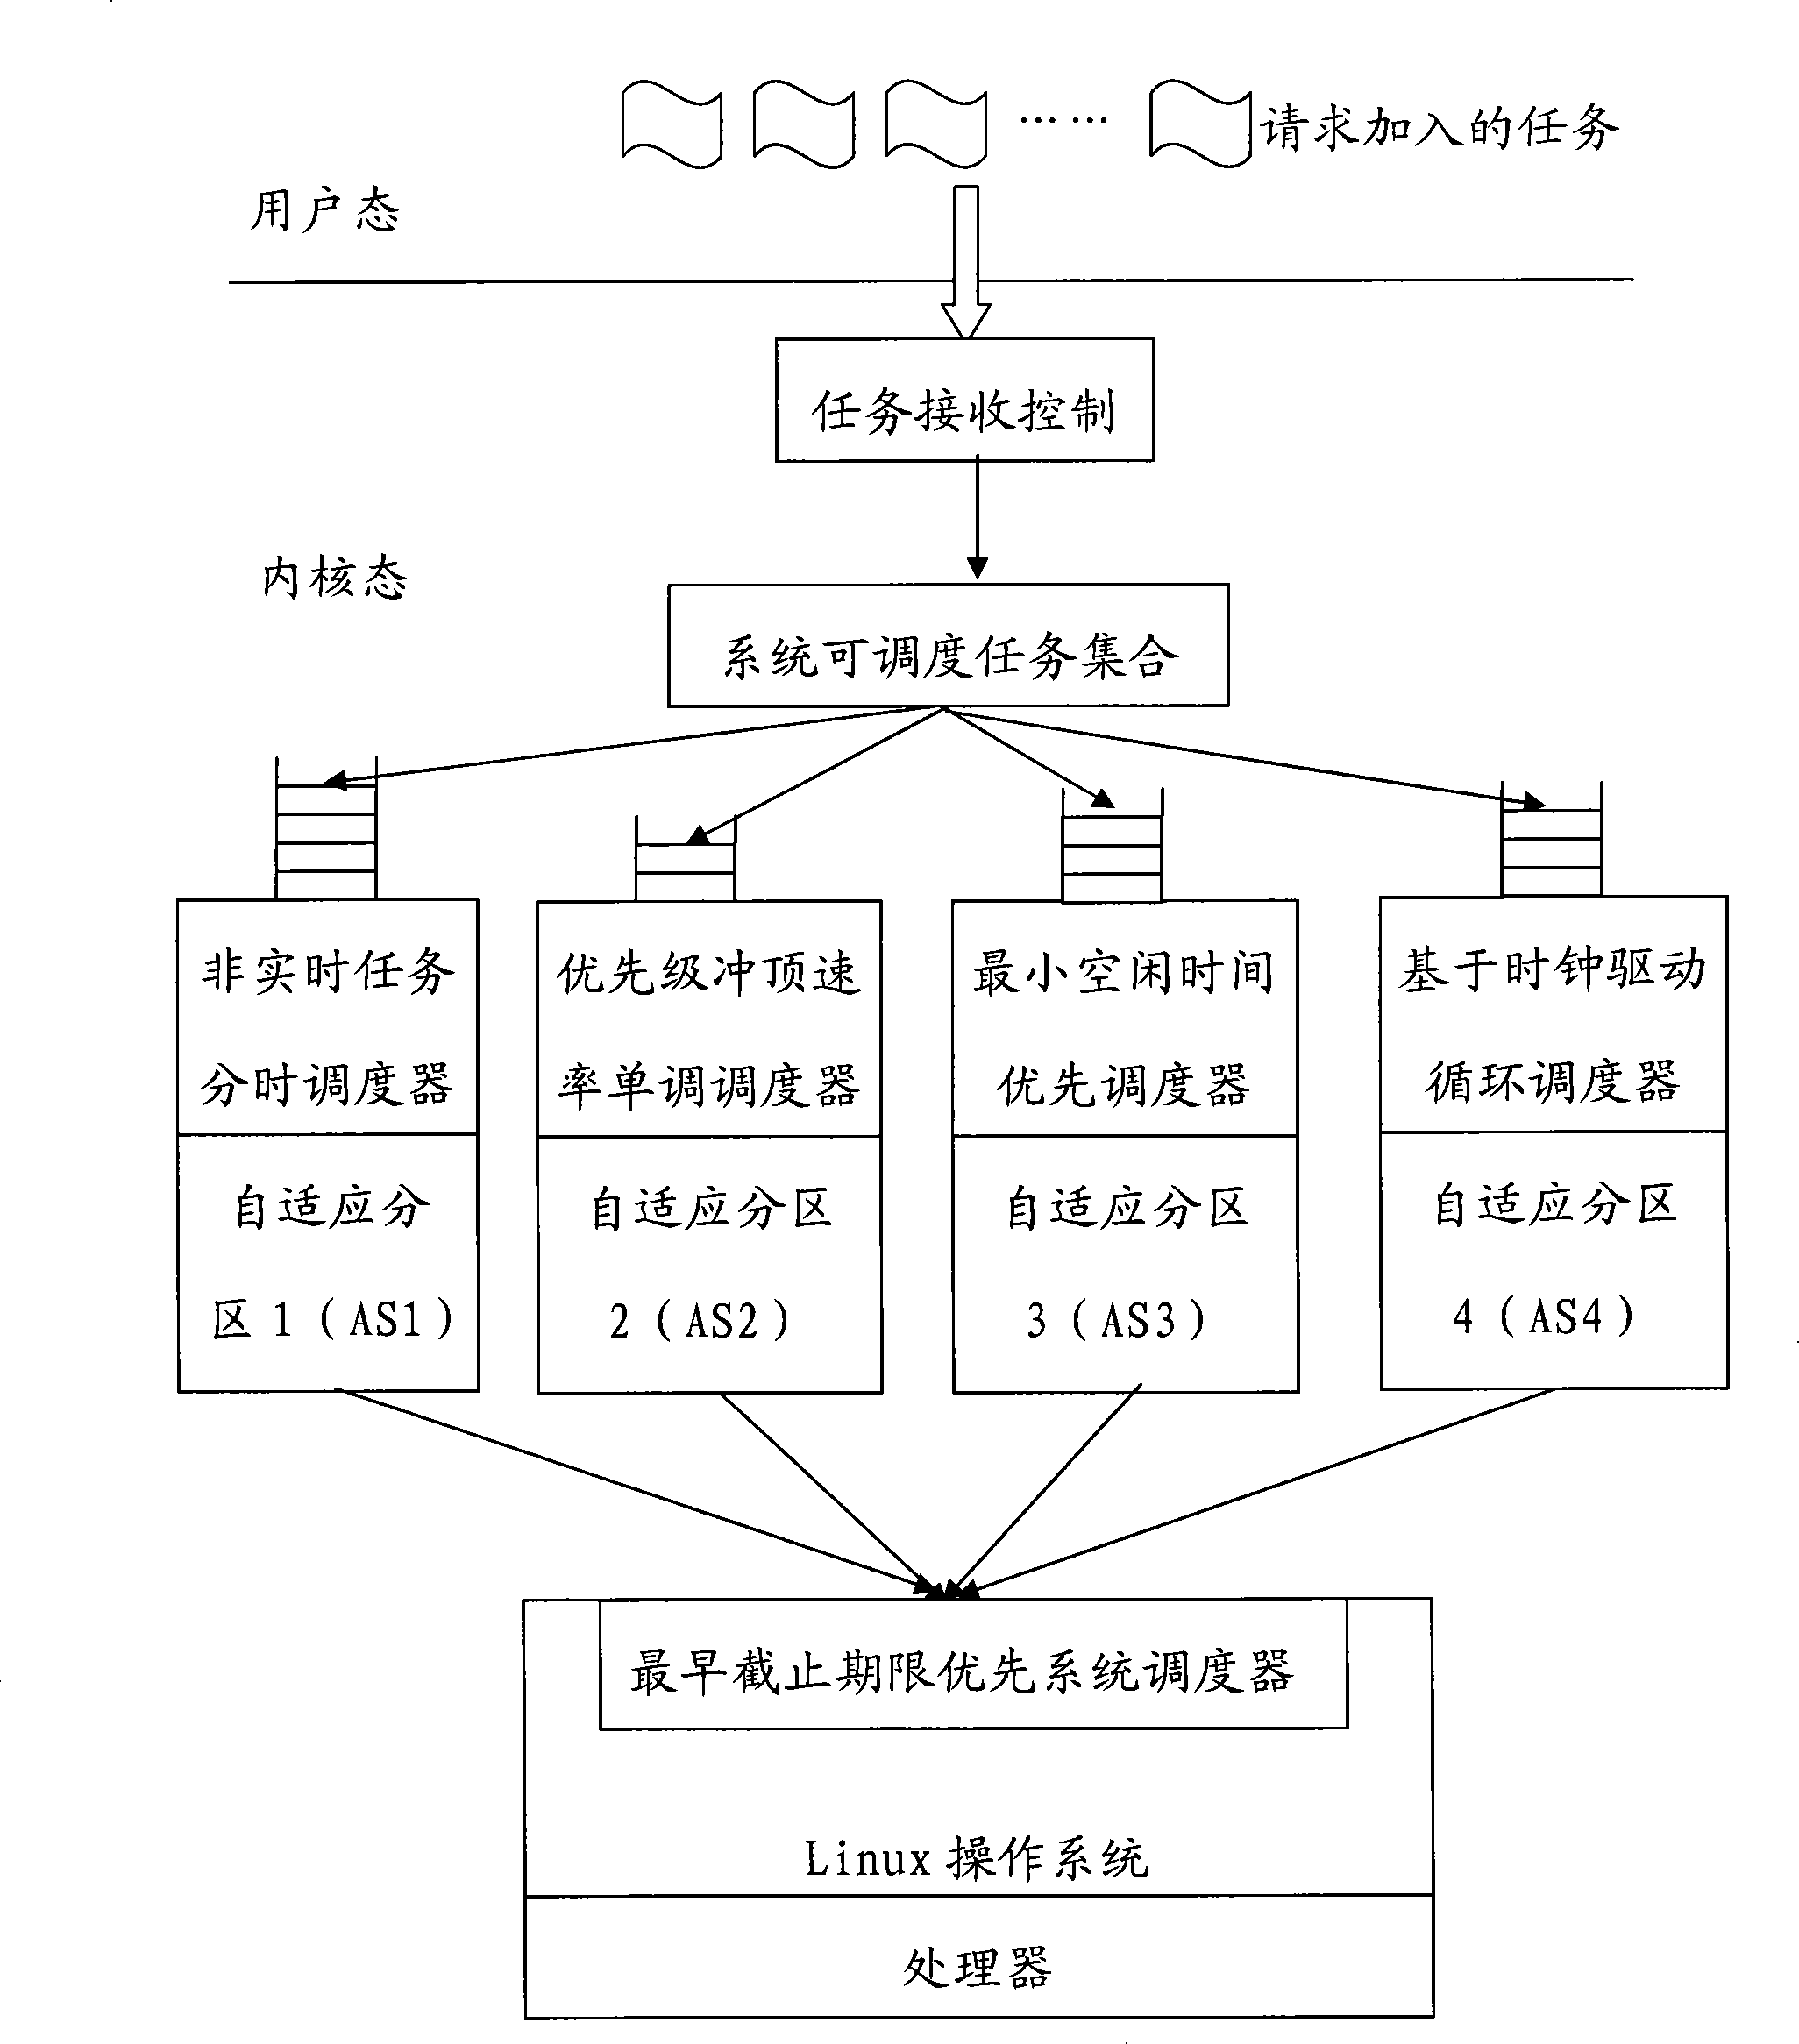 Task scheduling apparatus and method for embedded operating system